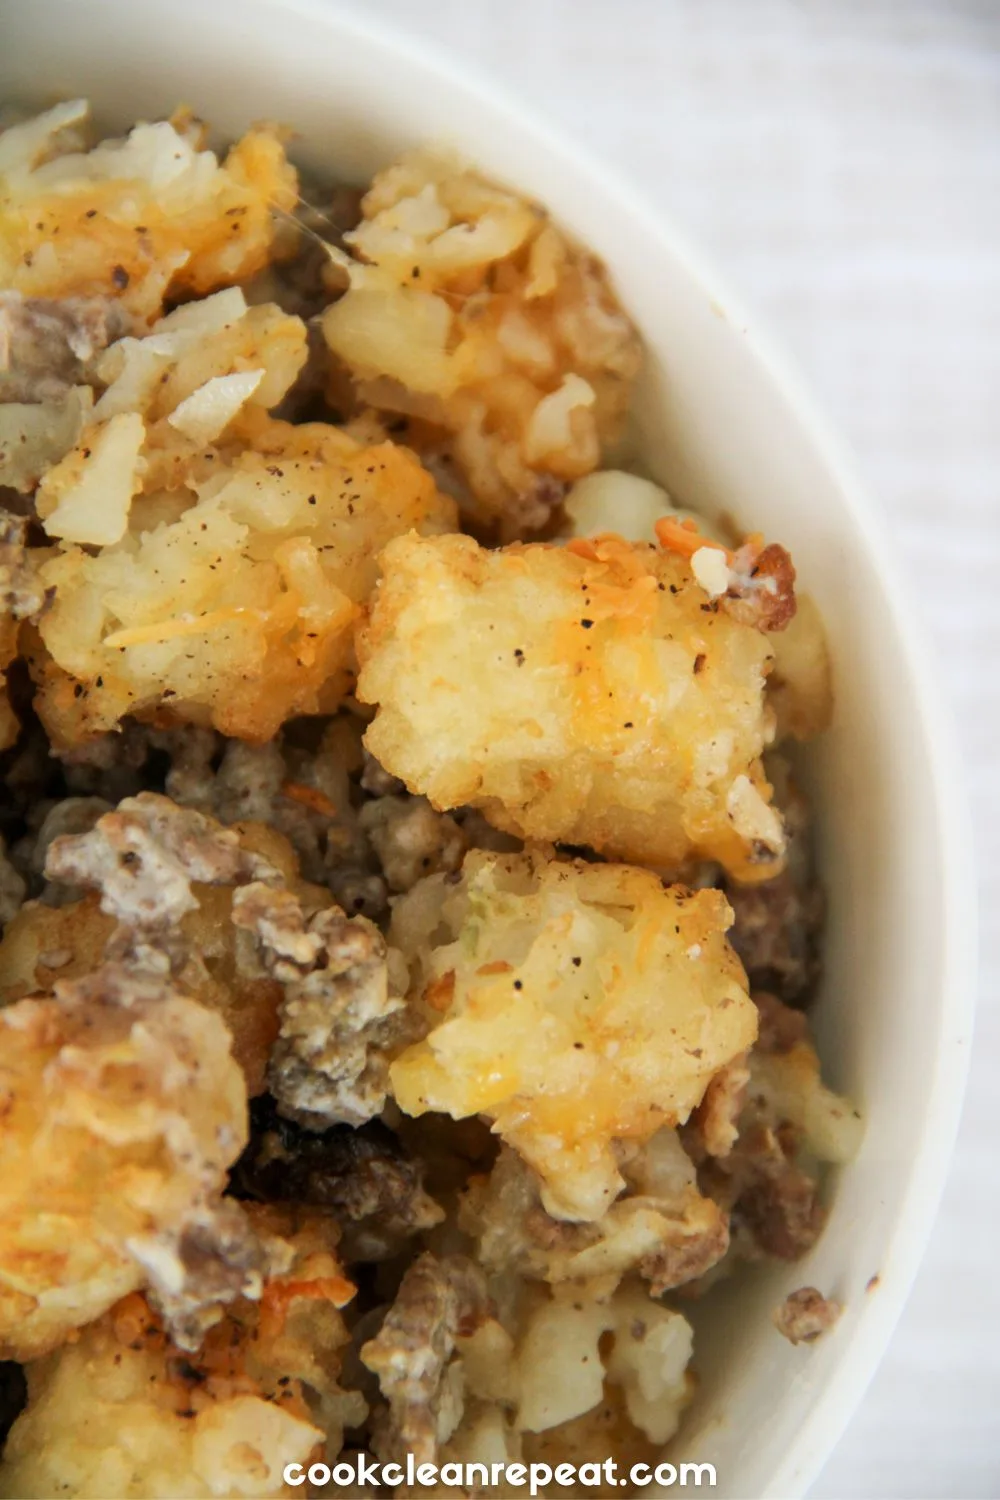 half of a tater tot casserole in a white bowl